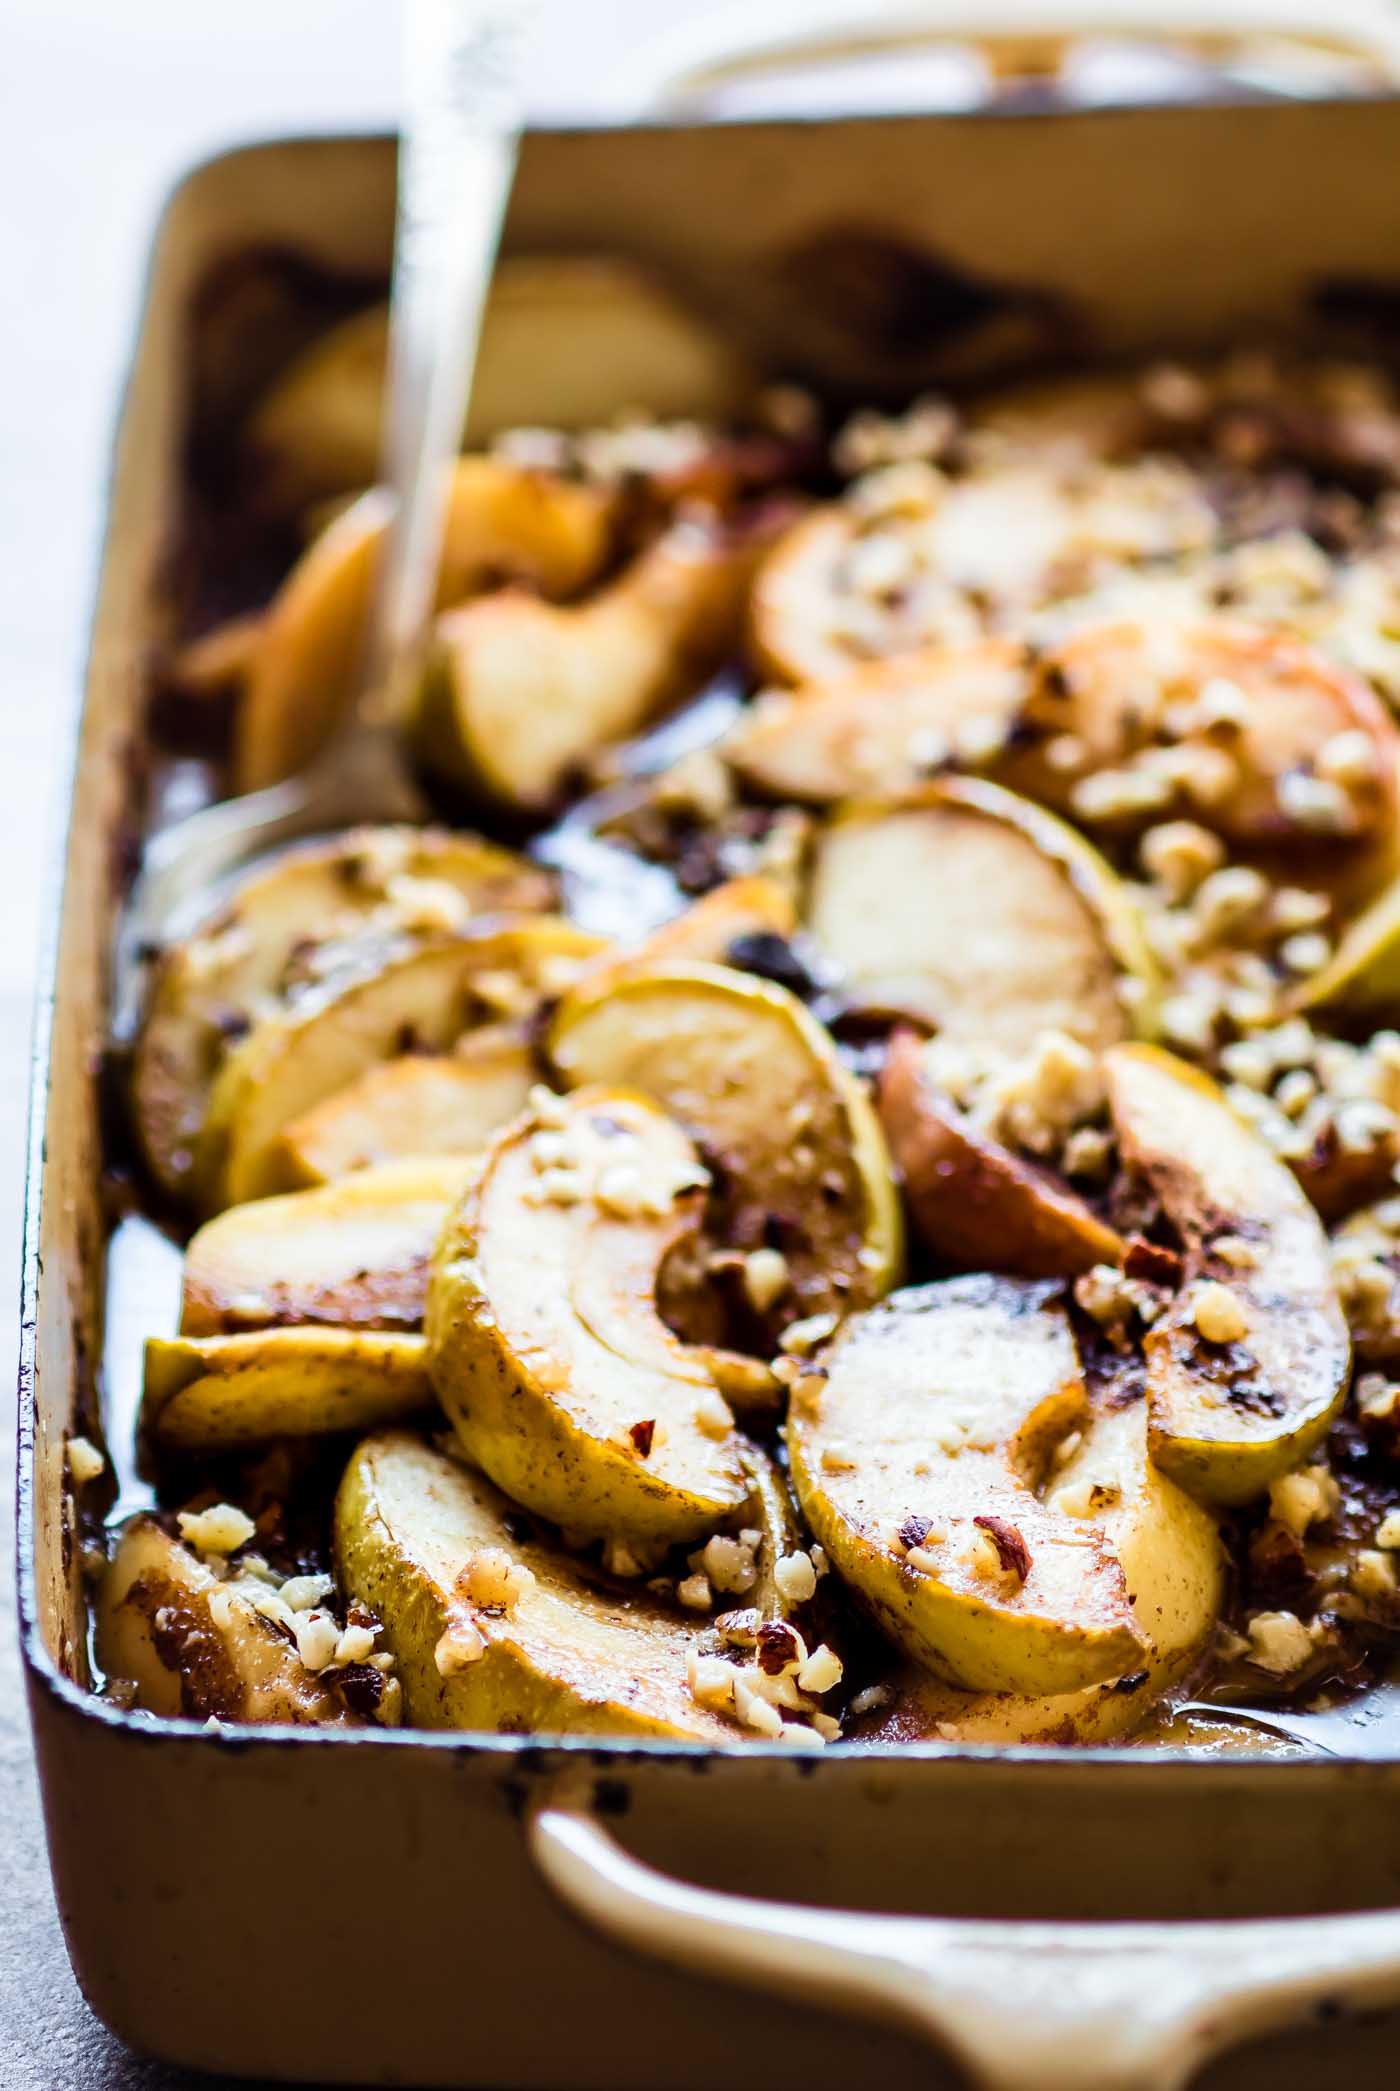 Caramelized Apple Cider Hot Fruit Bake with sliced apples and nut crumble in casserole dish